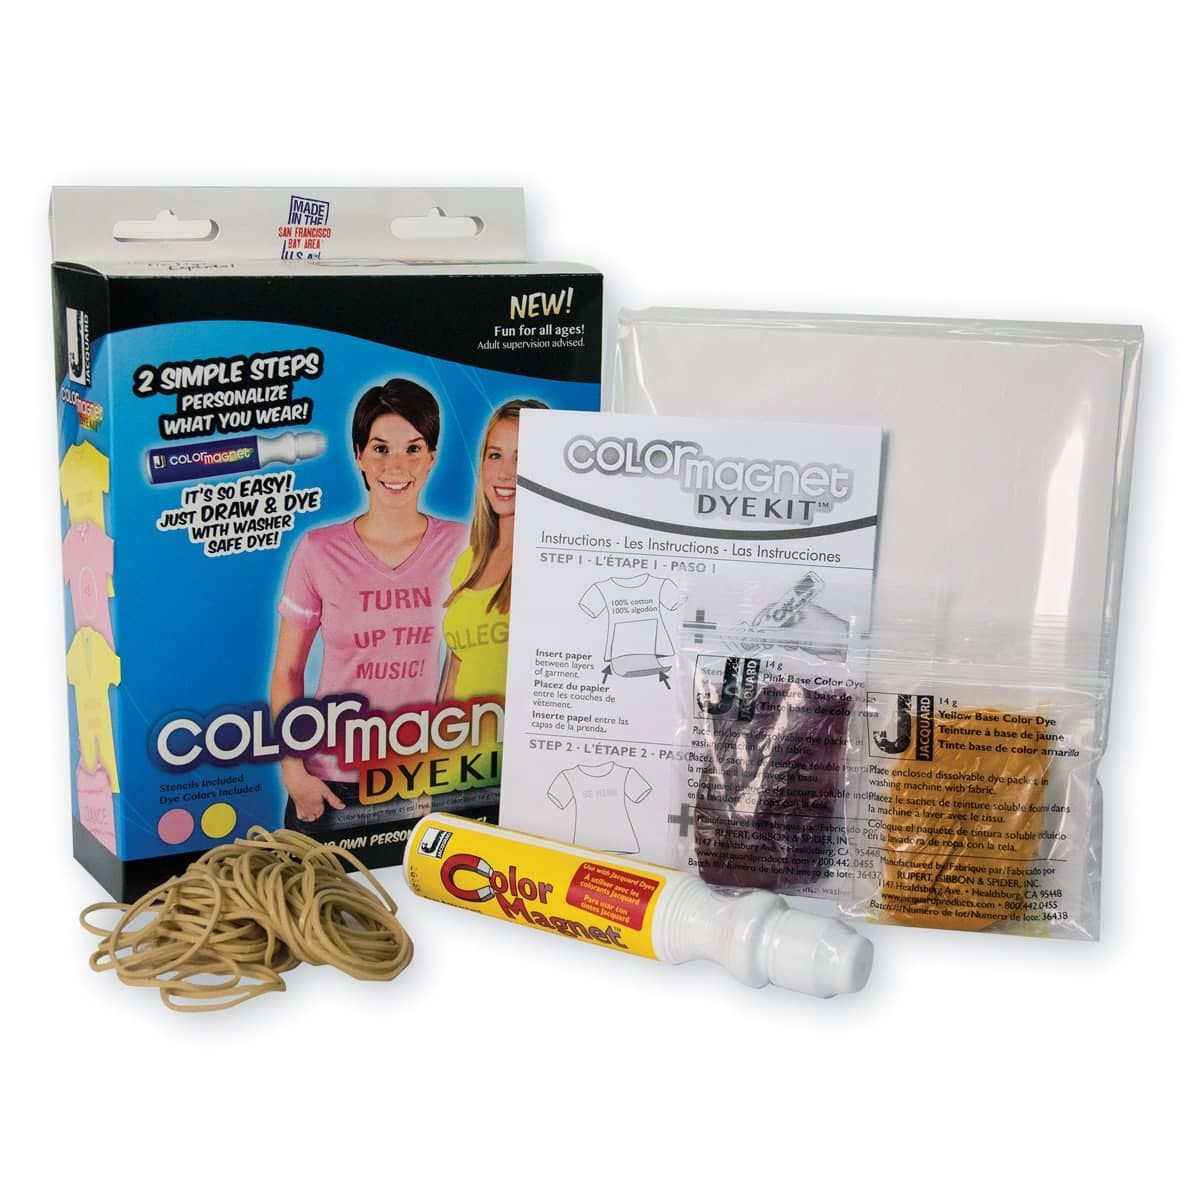 Includes: Rubber bands, stencils and instructions